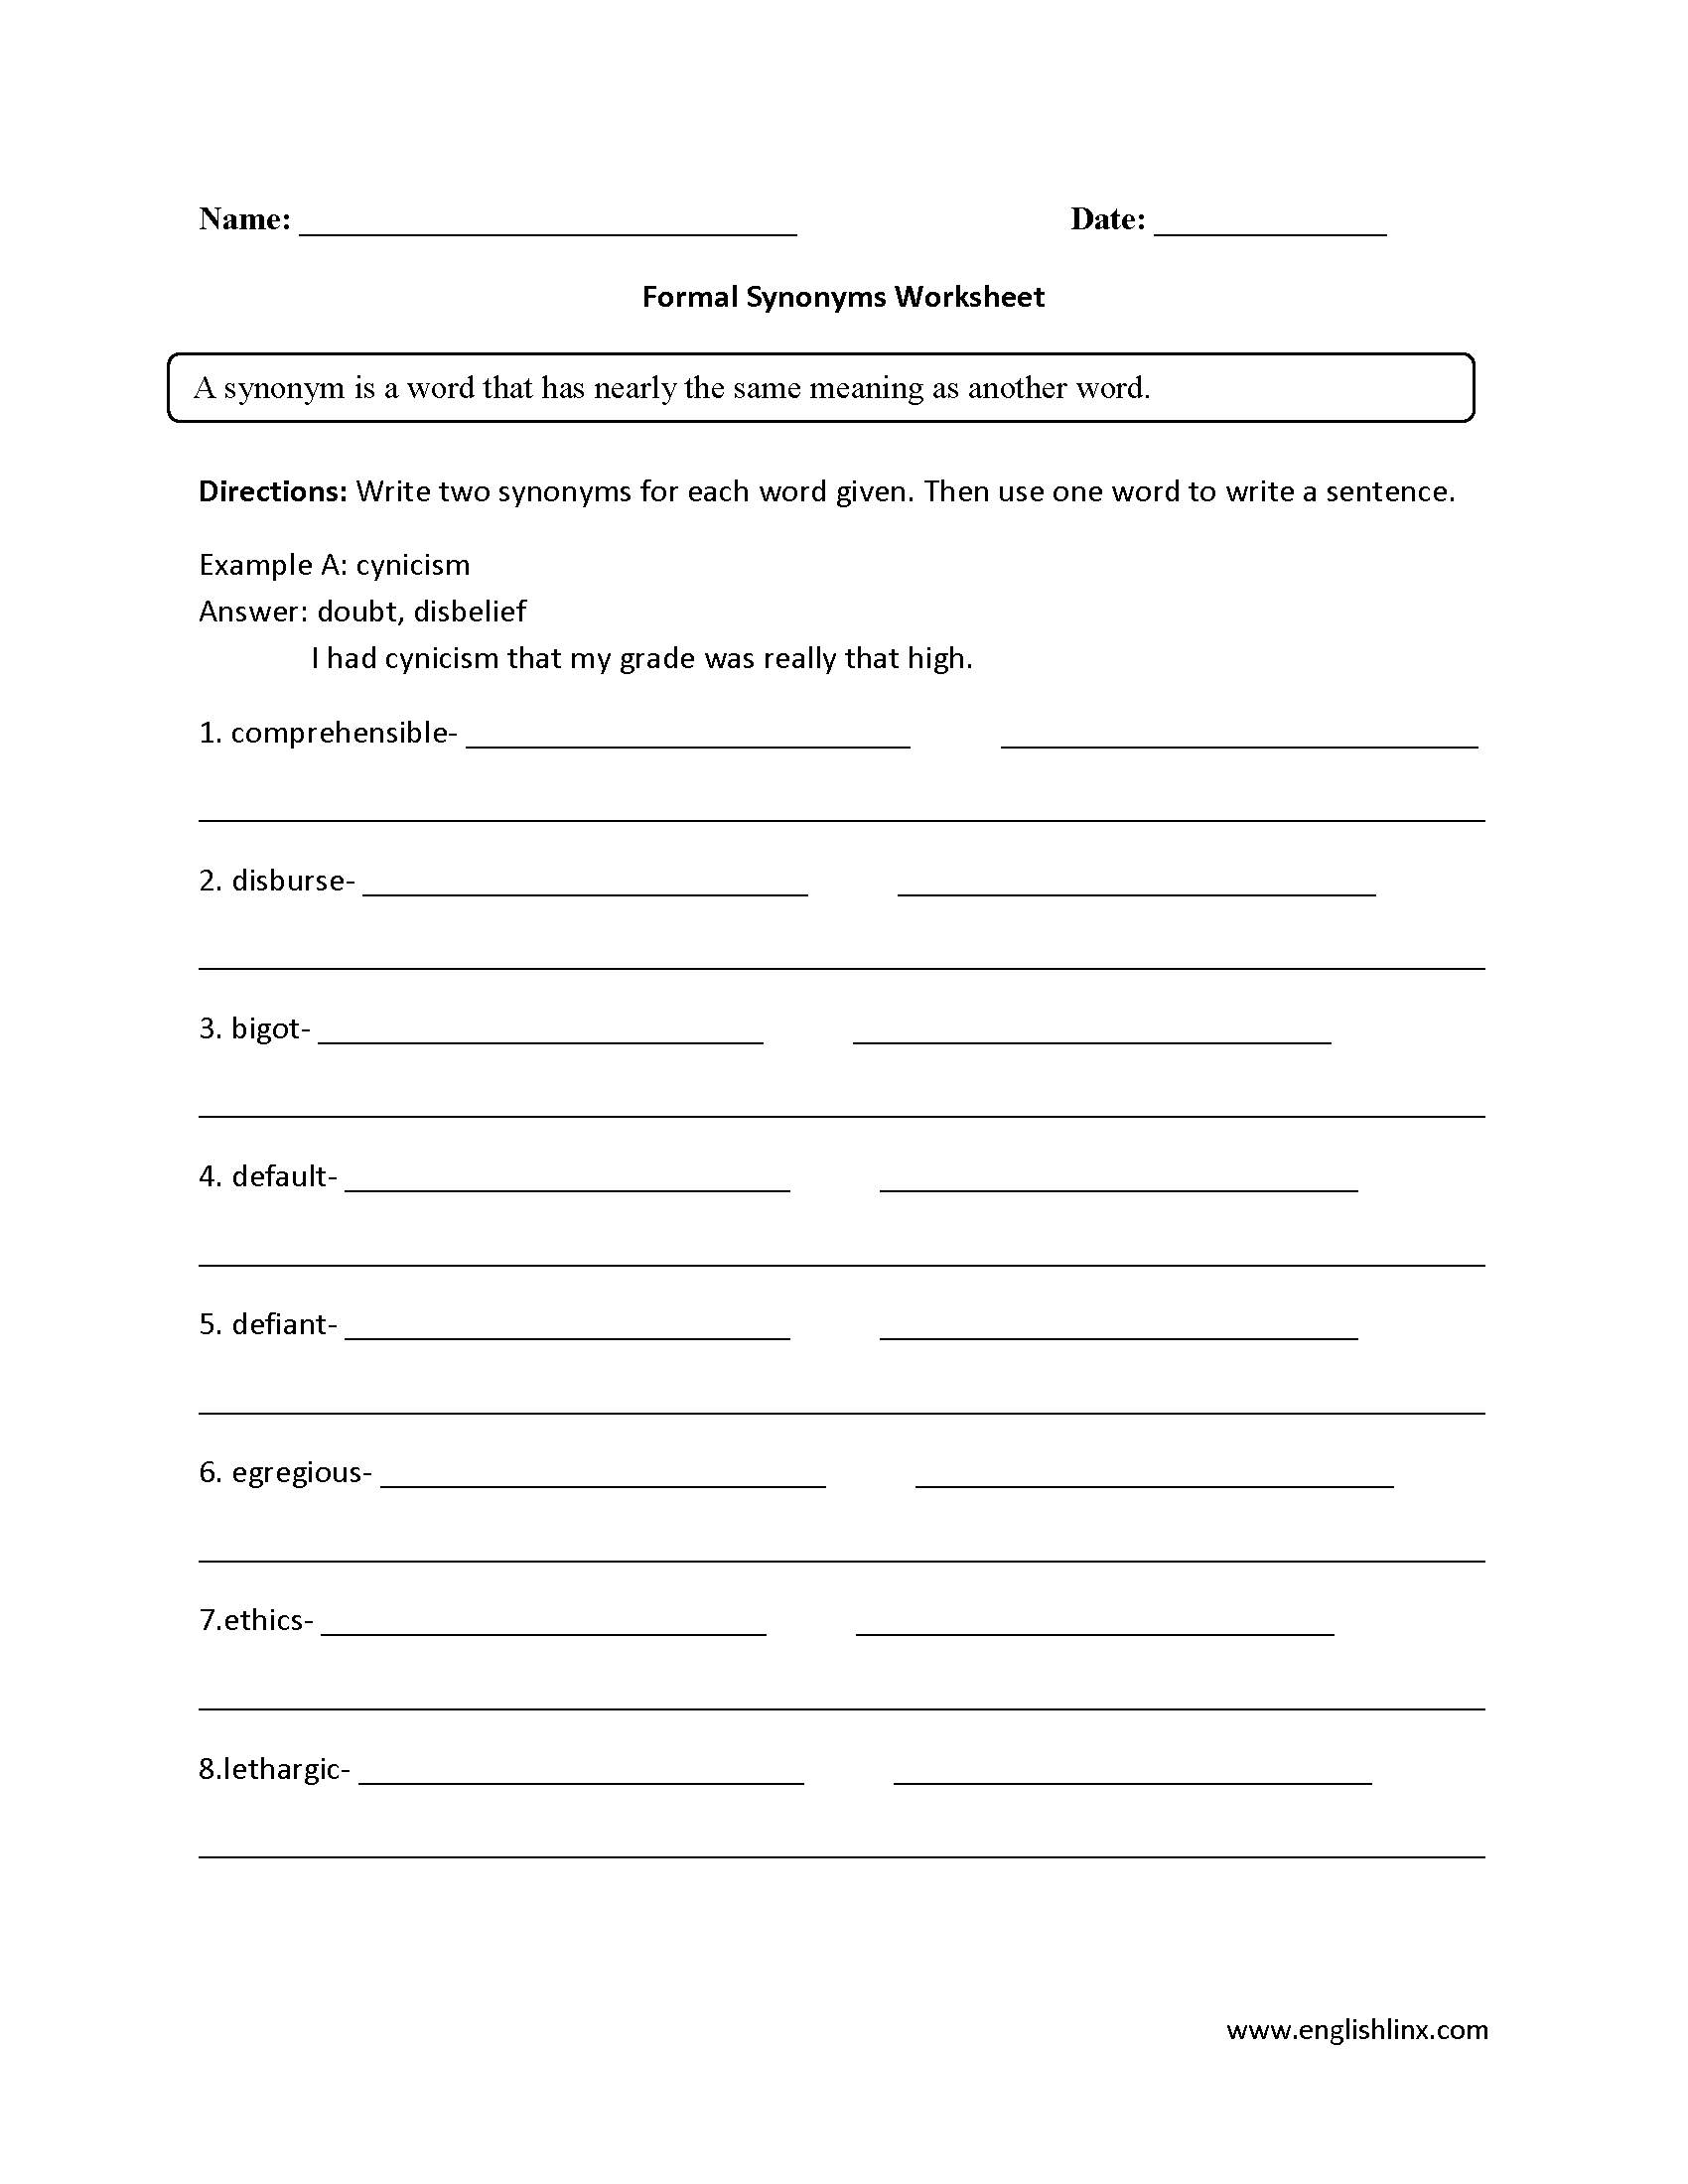 Formal Synonyms Worksheets